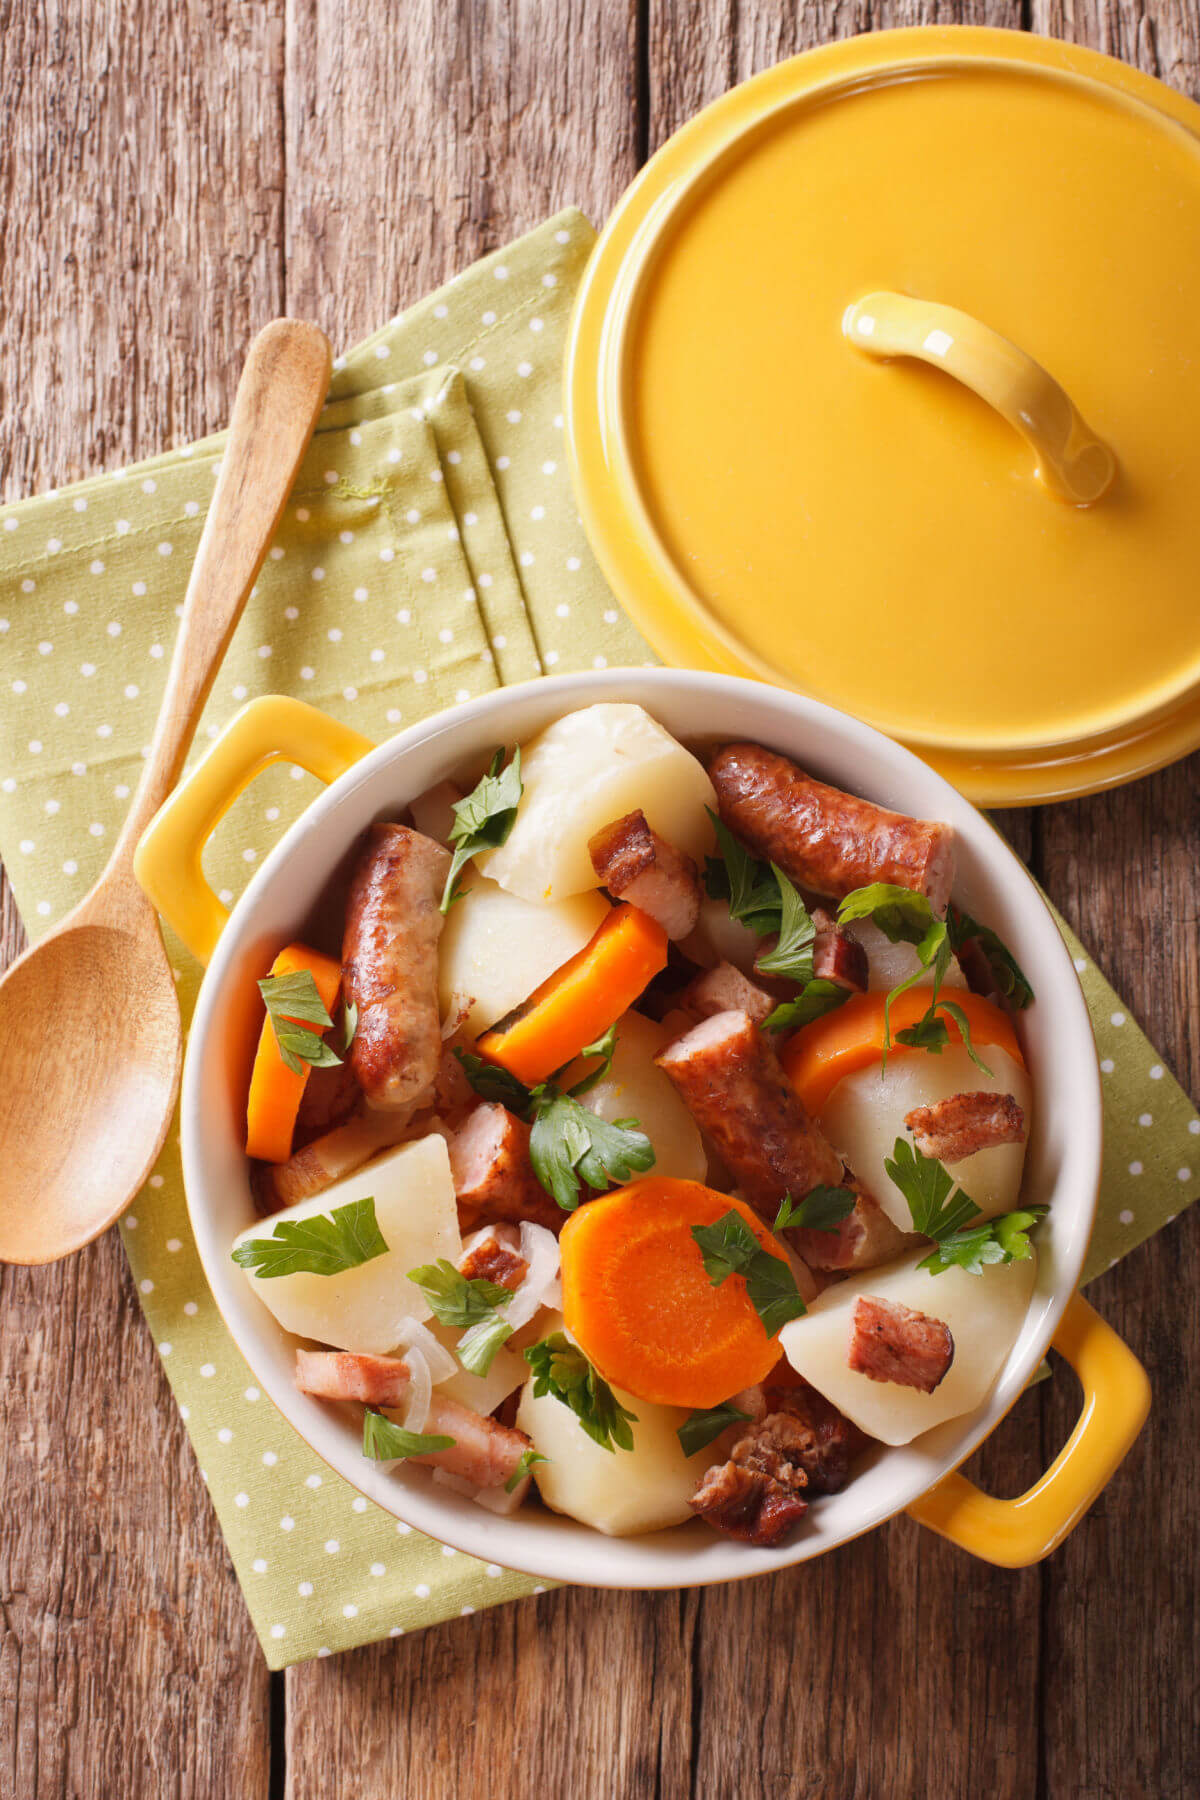 A yellow Dutch oven filled with Irish Coddle, a traditional stew made with sausages, carrots, and potatoes. 